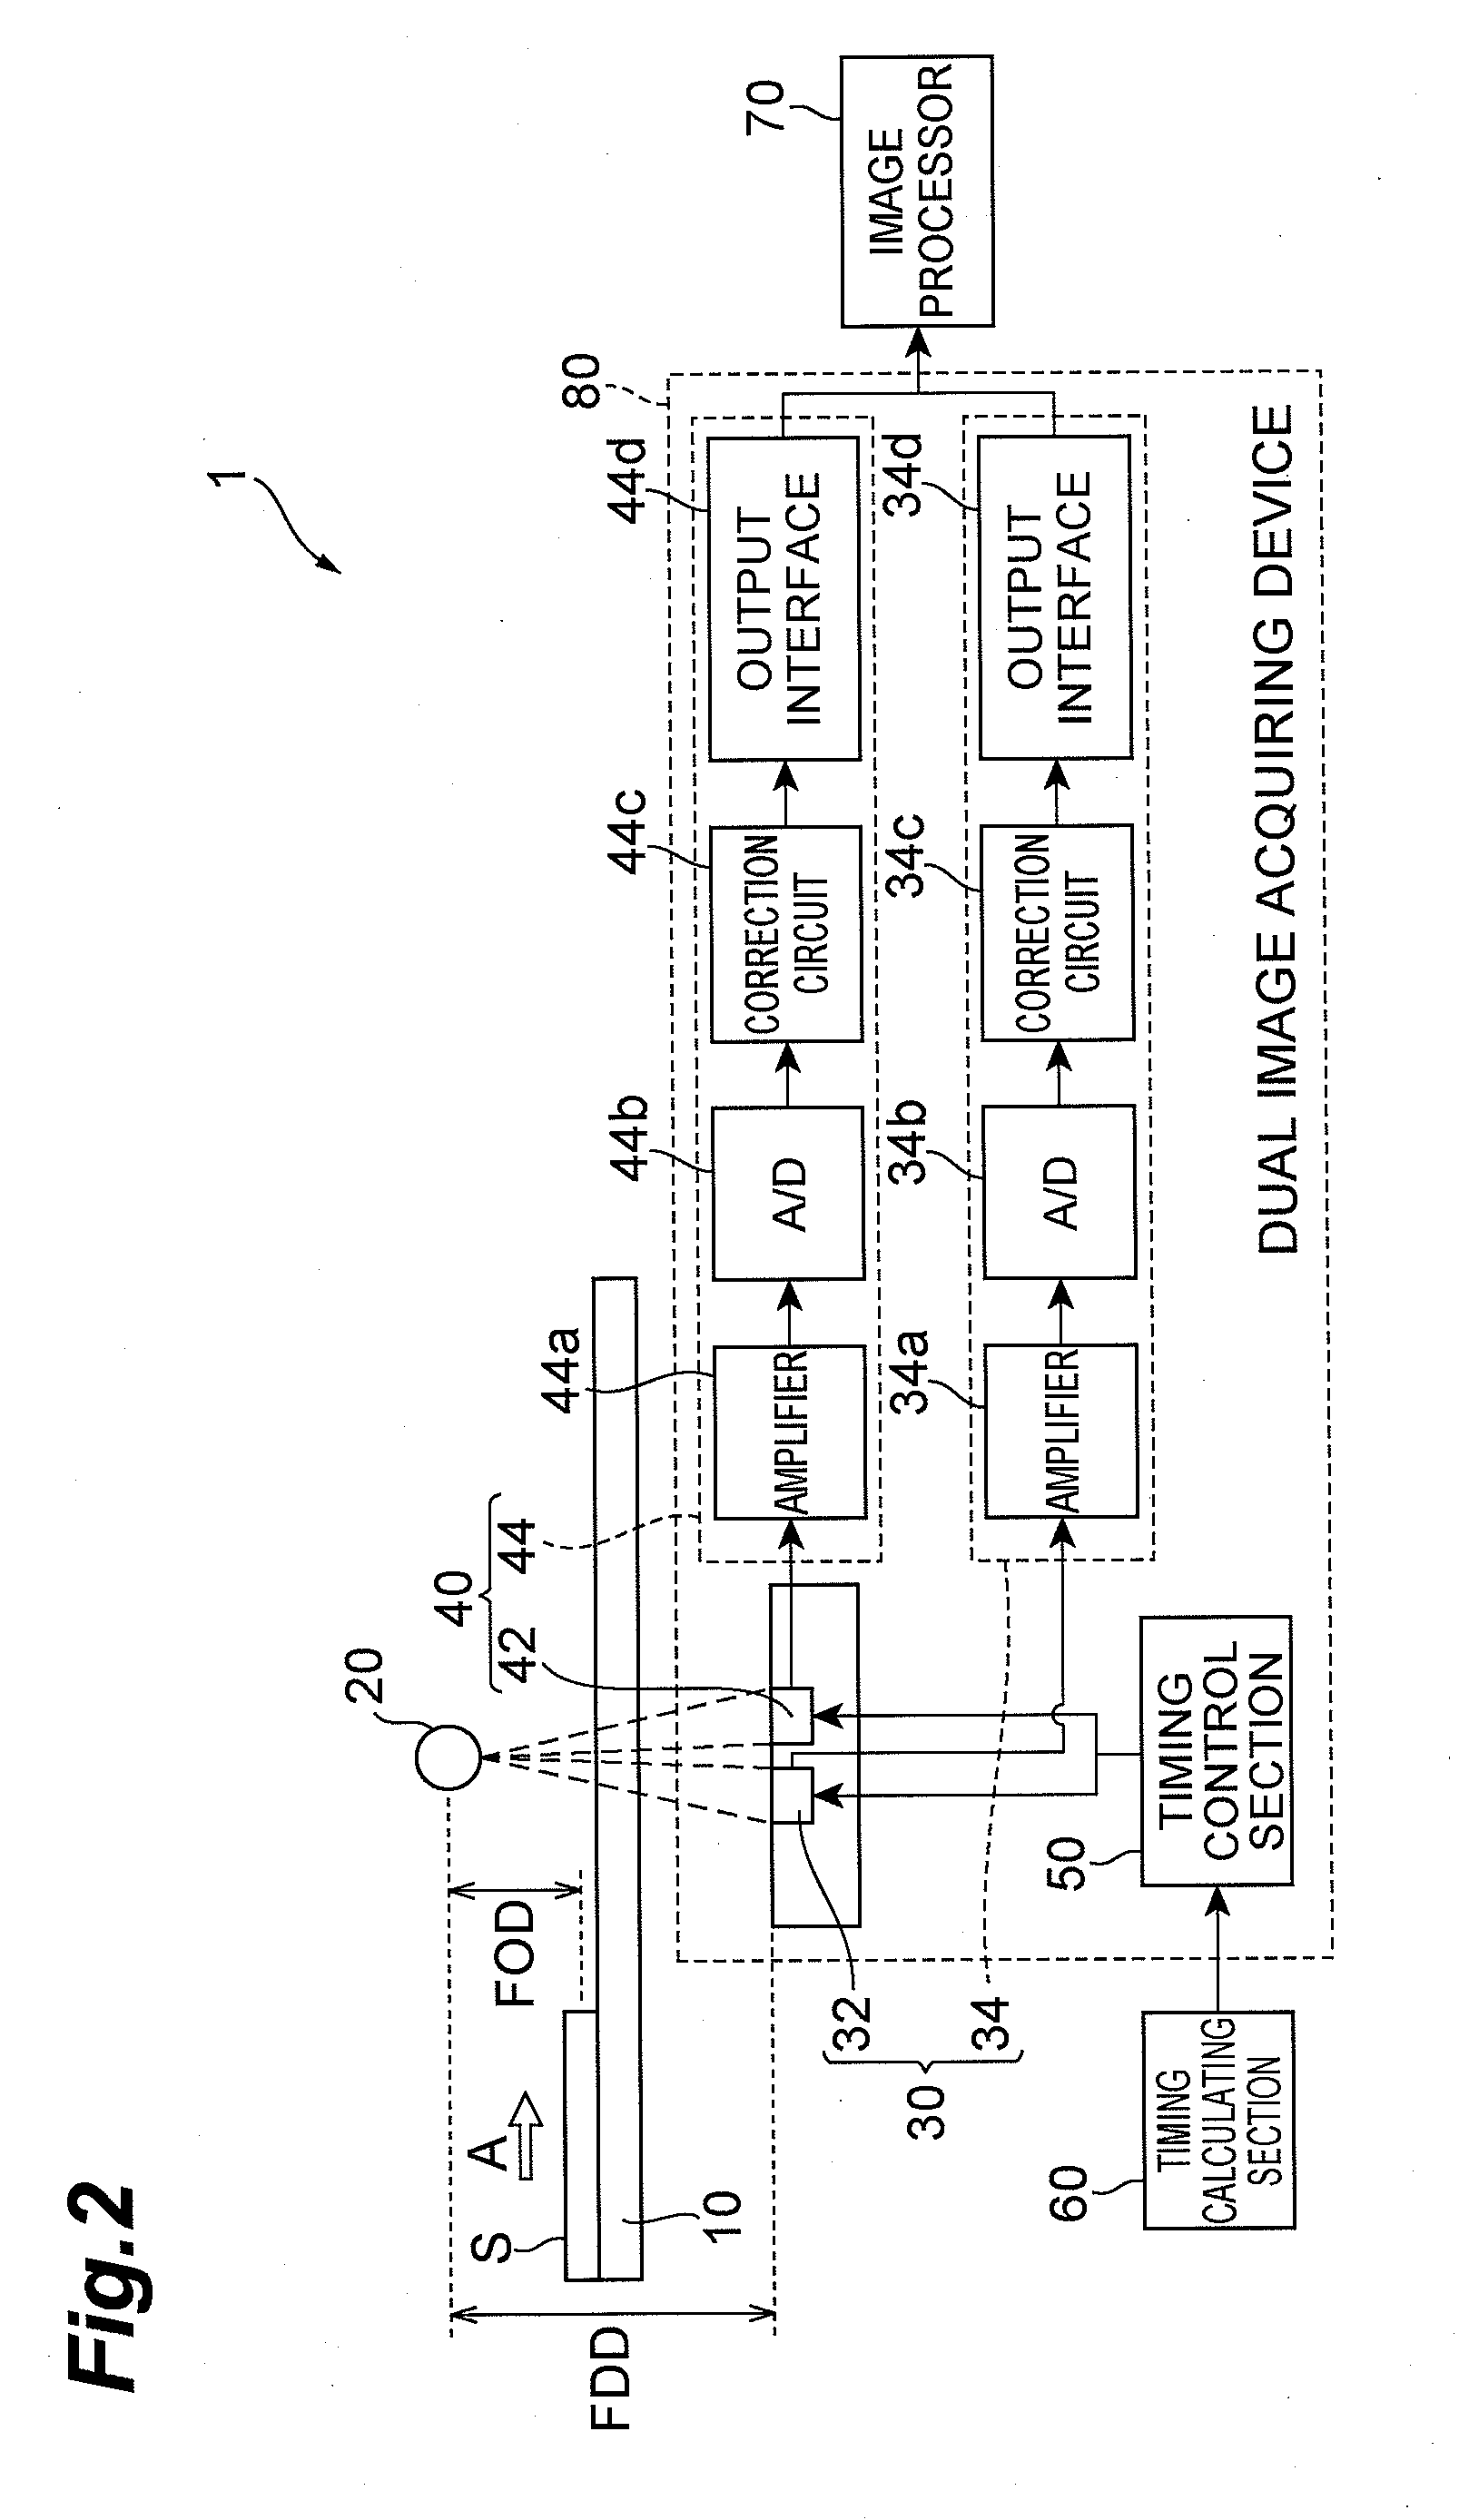 Radiation detection device, radiation image acquiring system, and method for detecting radiation